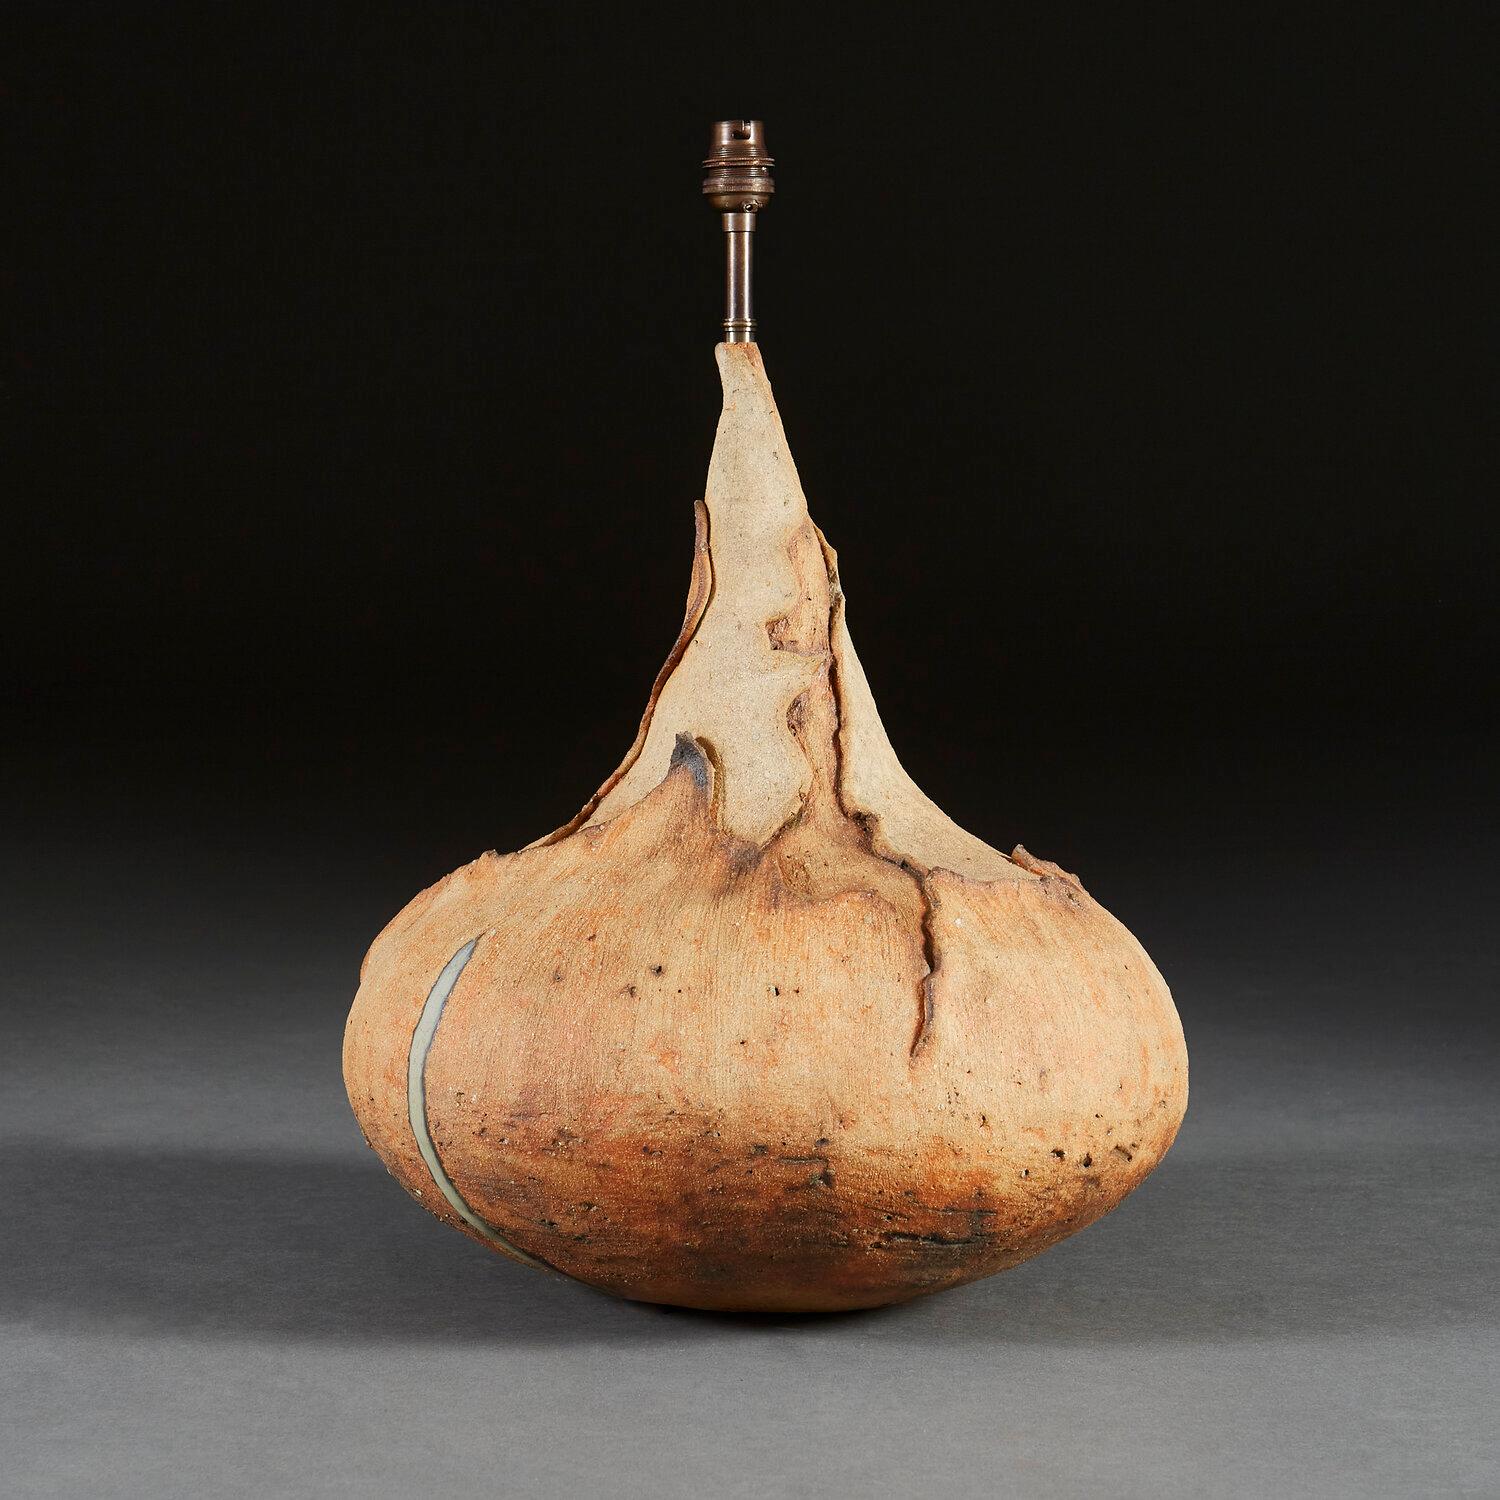 An unusual early twentieth century terracotta onion, with textured layers, now as a lamp.

Please note that the lampshade is not included, and that the lamp is currently wired for the UK.